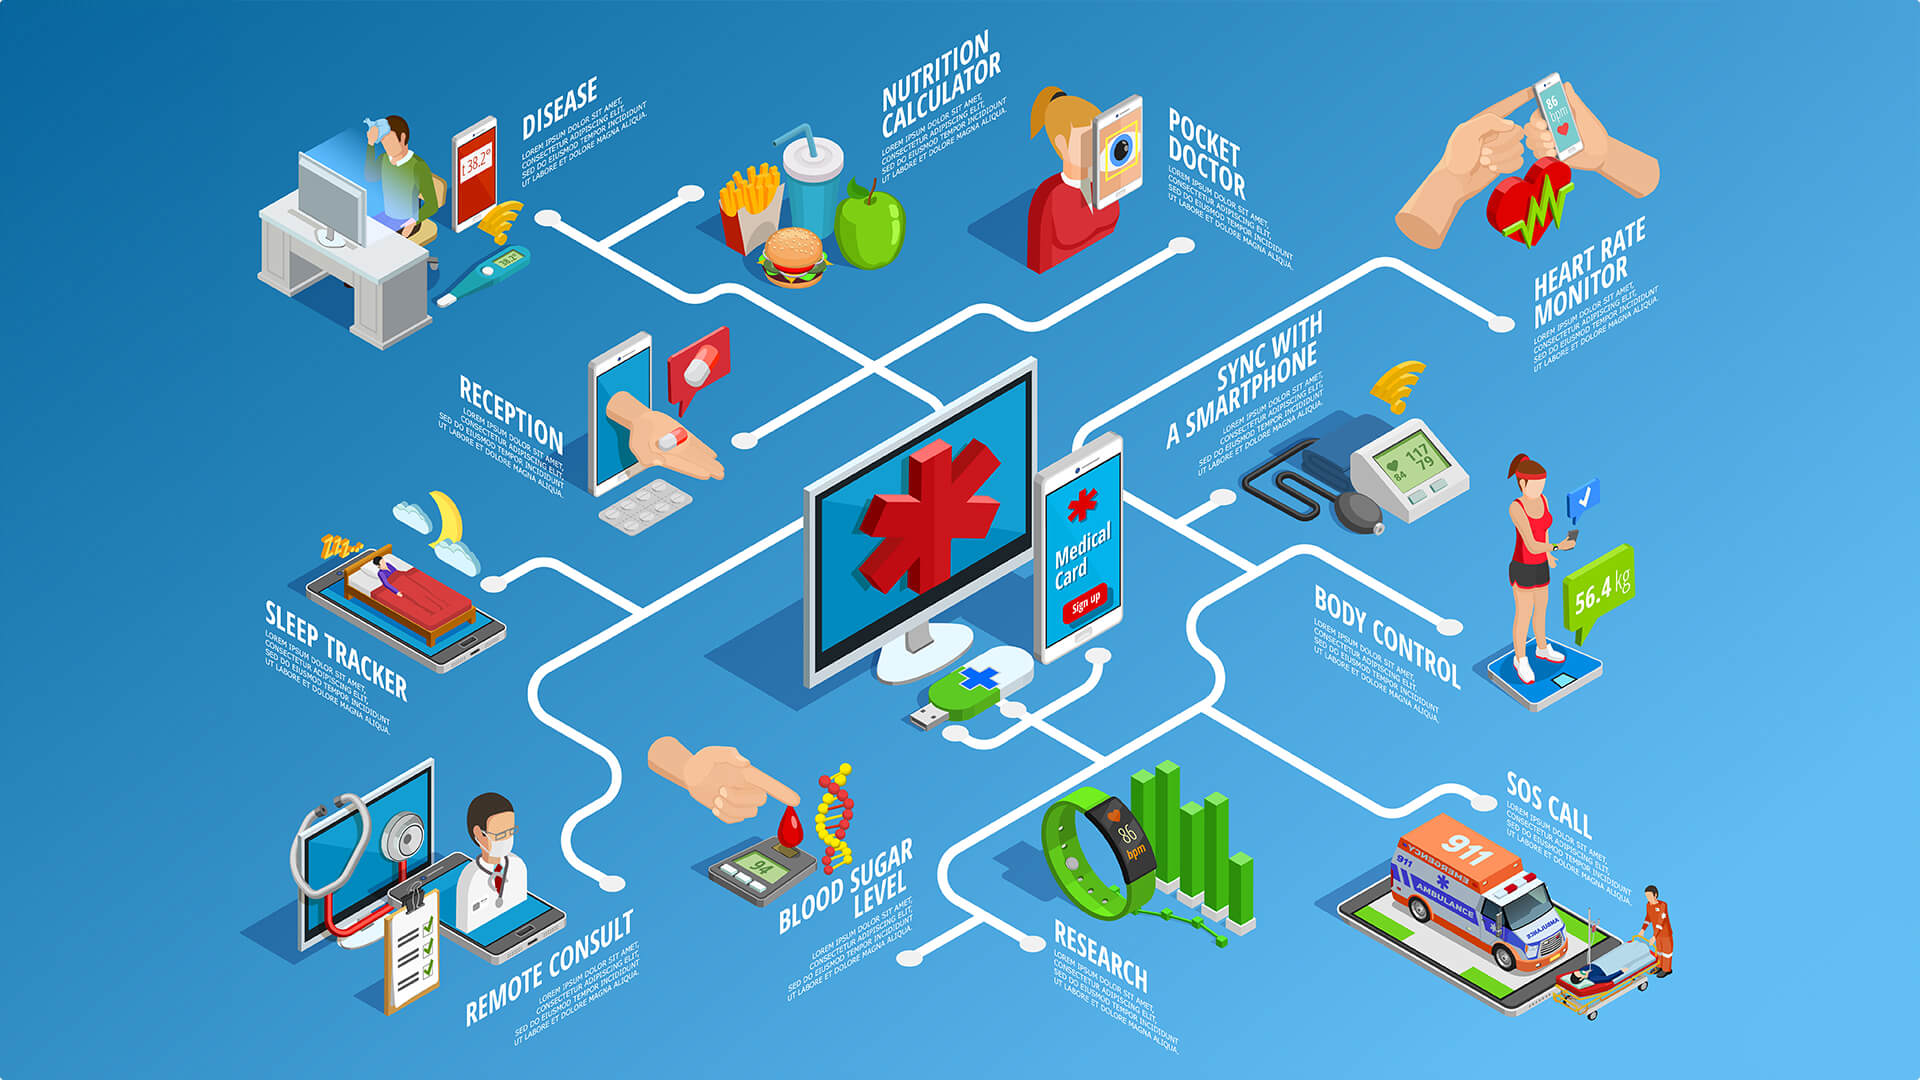 Illustrated isometric health technology network featuring telemedicine, sleep and disease monitoring, nutrition tracking, emergency services, and fitness monitoring.